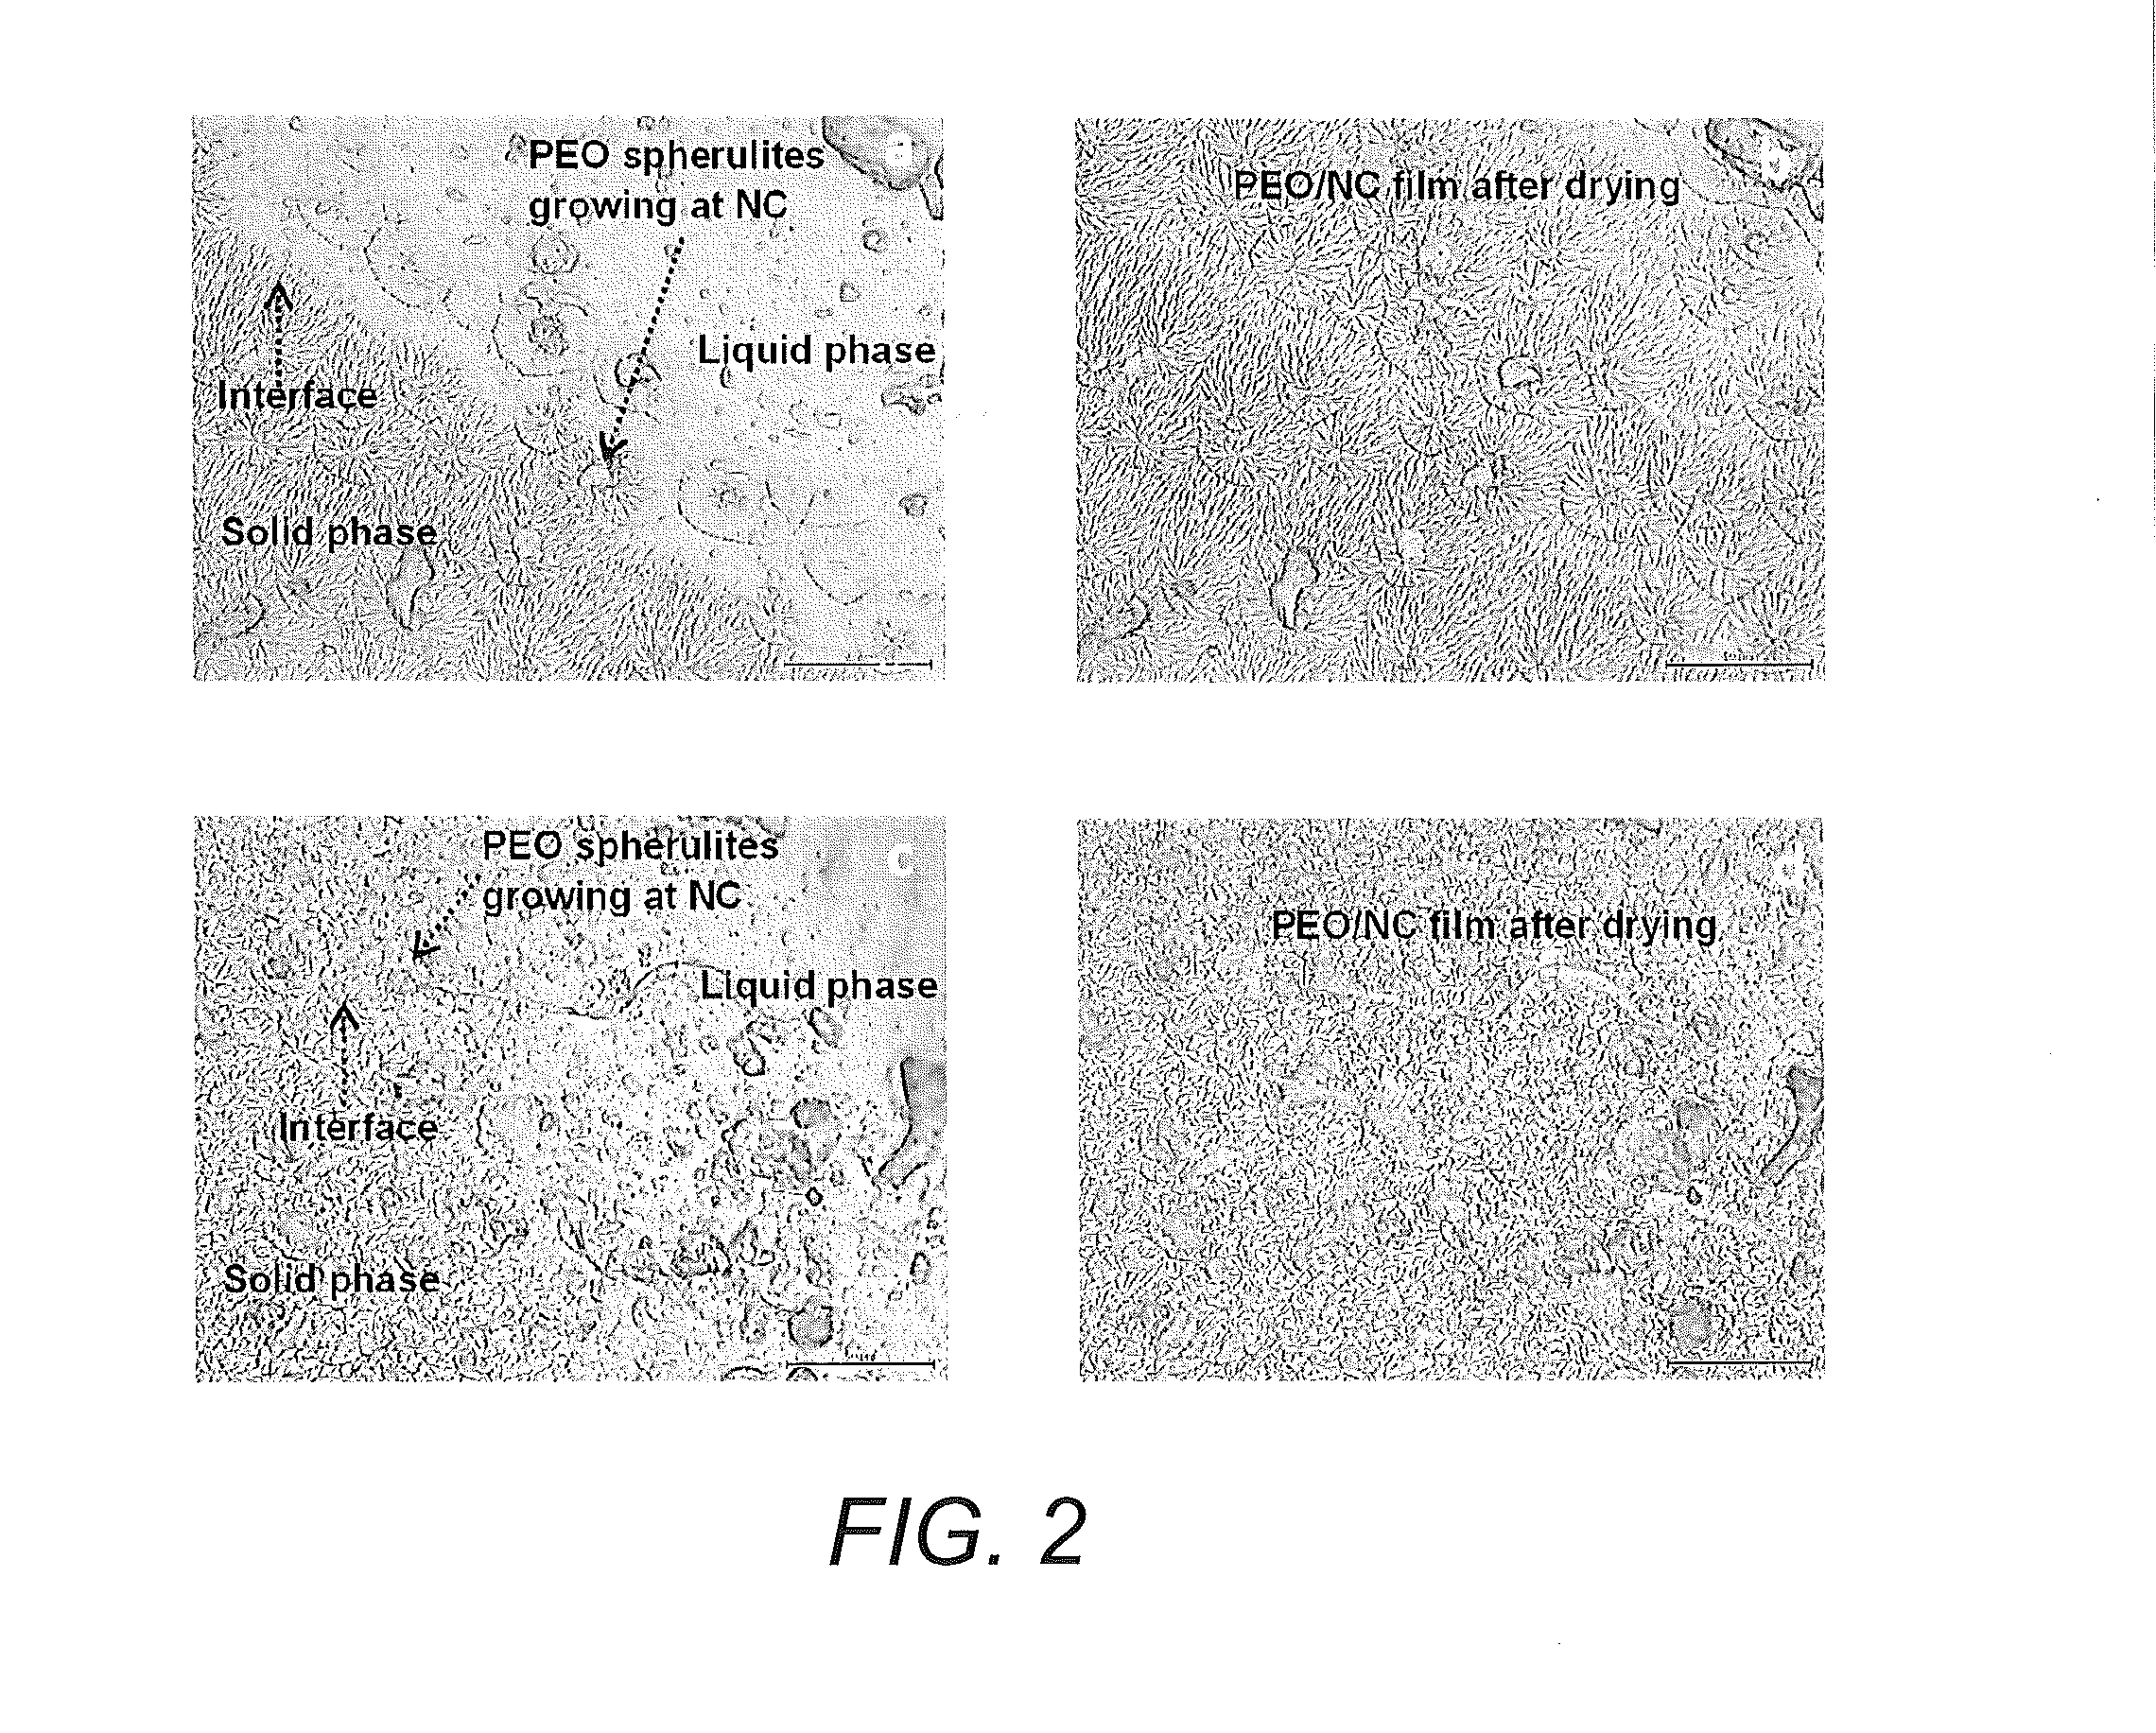 Fabrication of cellulose polymer composites and their application as solid electrolytes